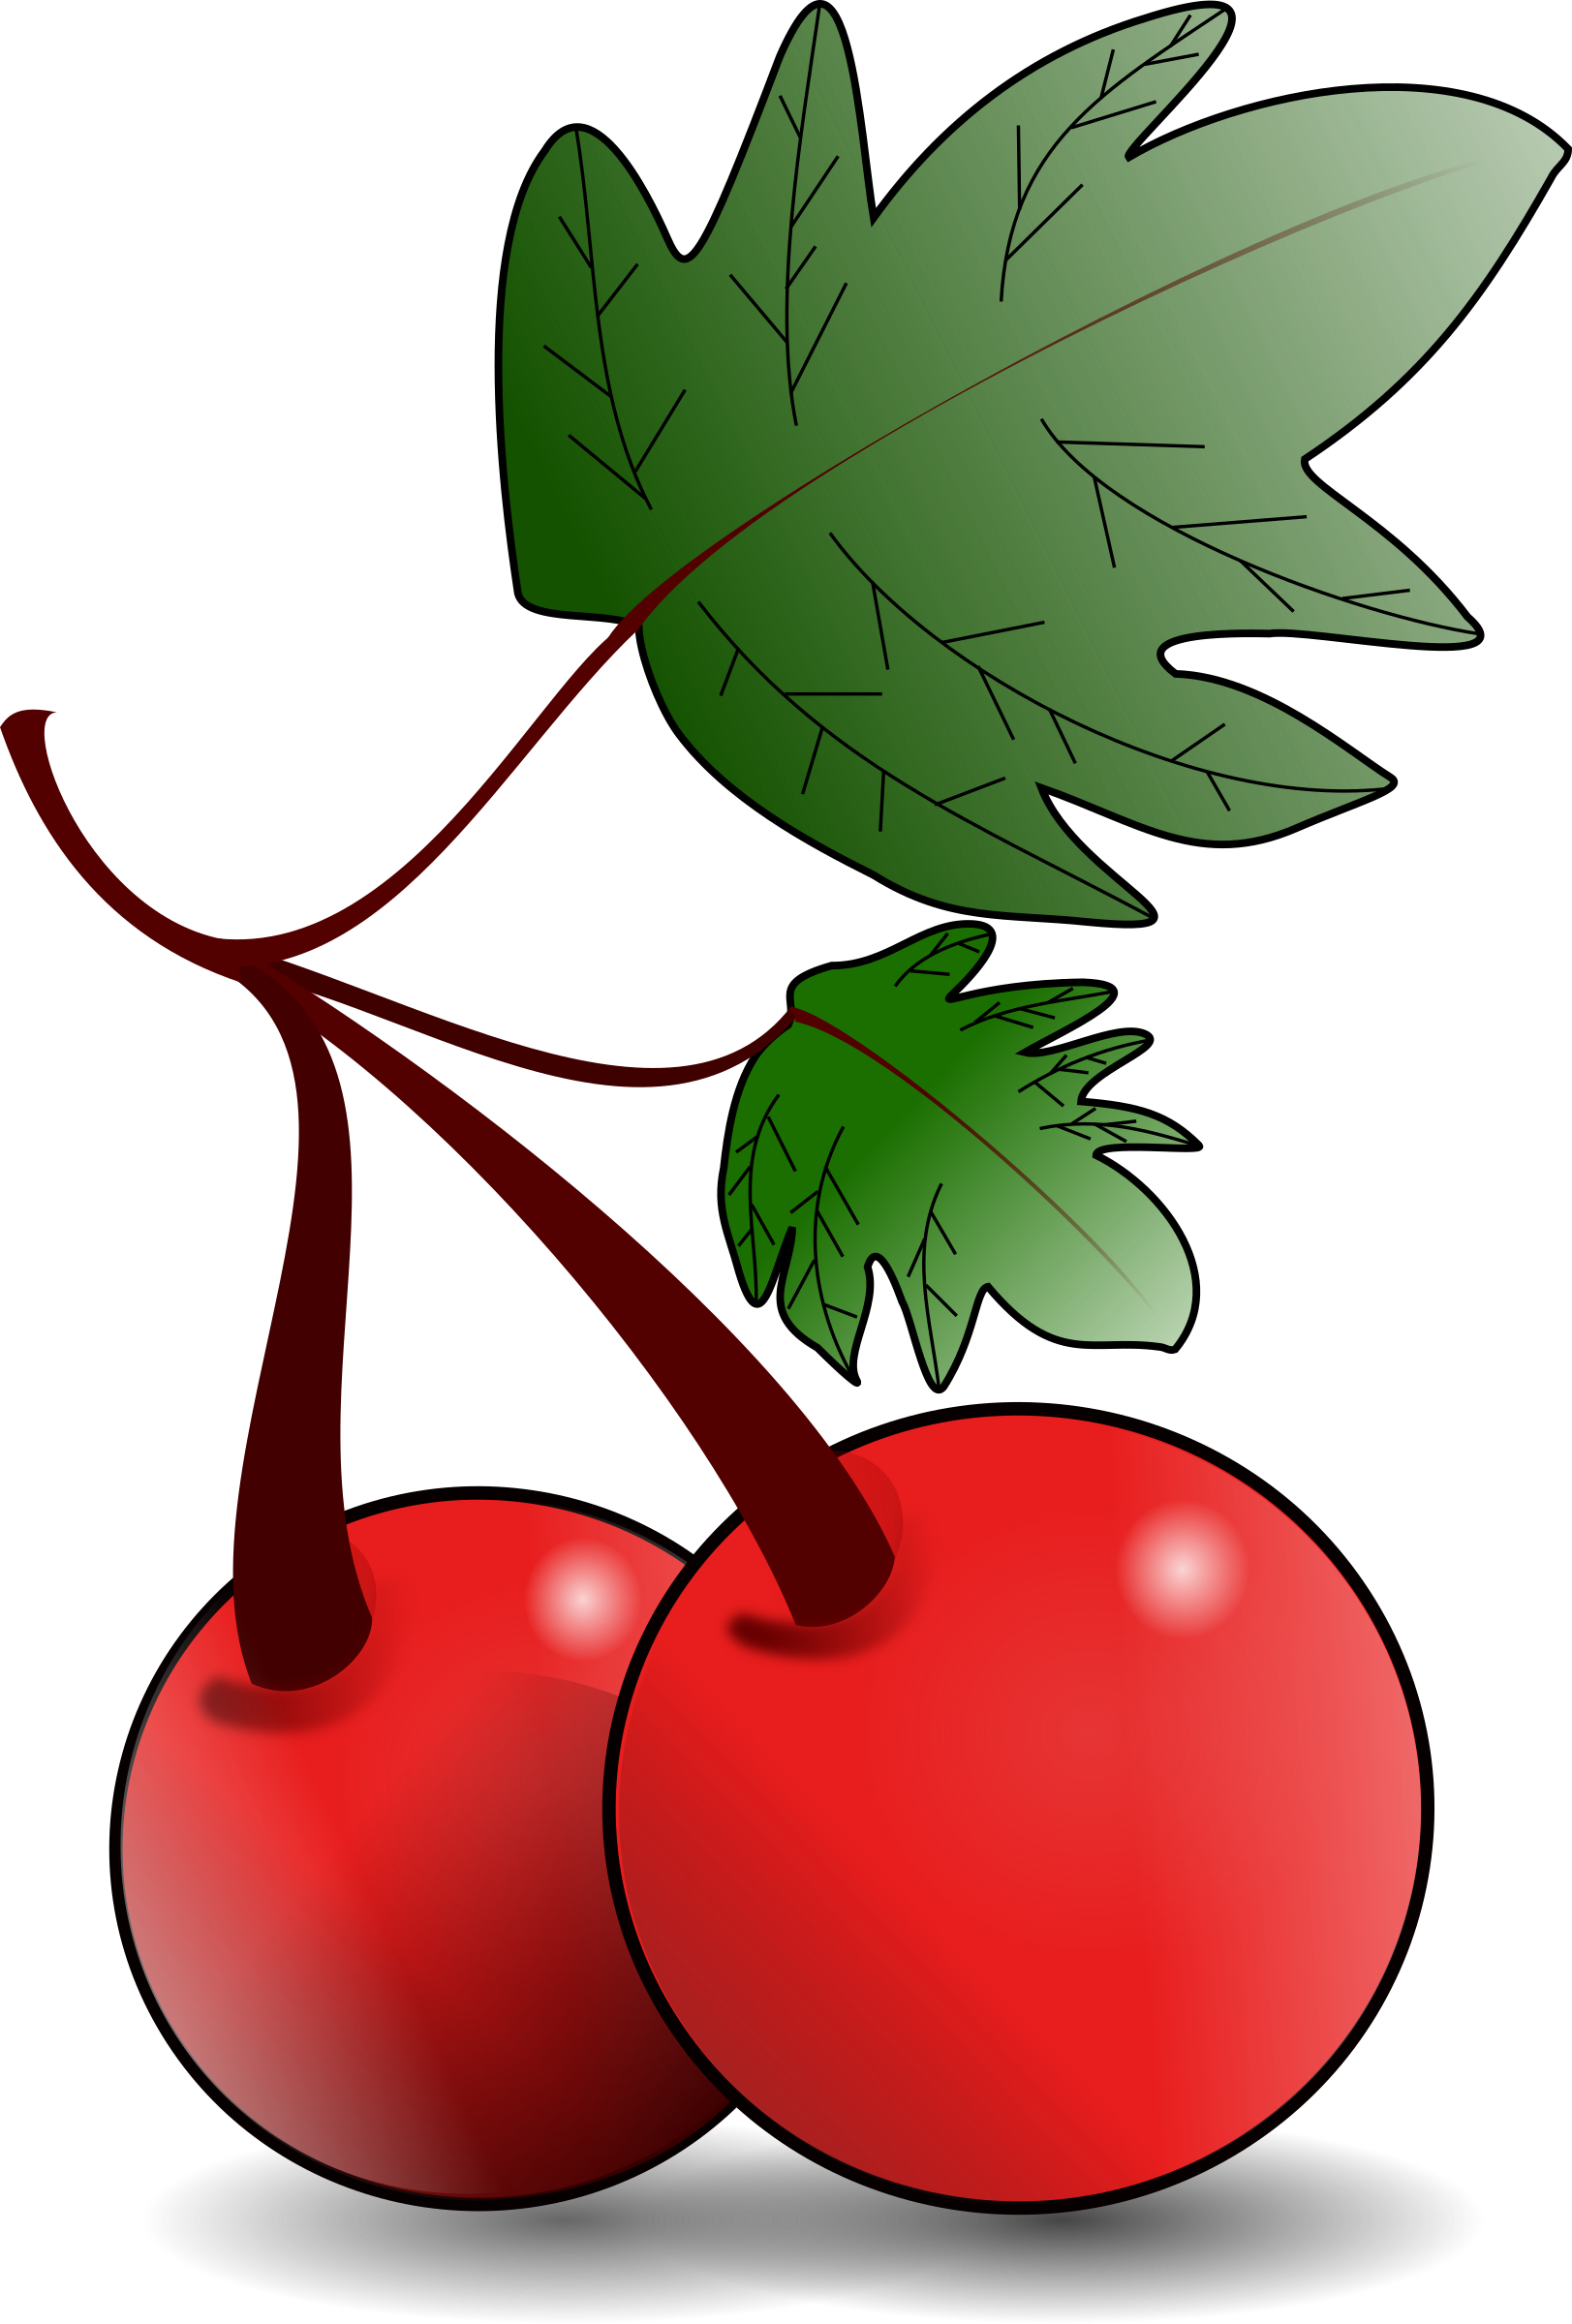 fruits clipart cherry